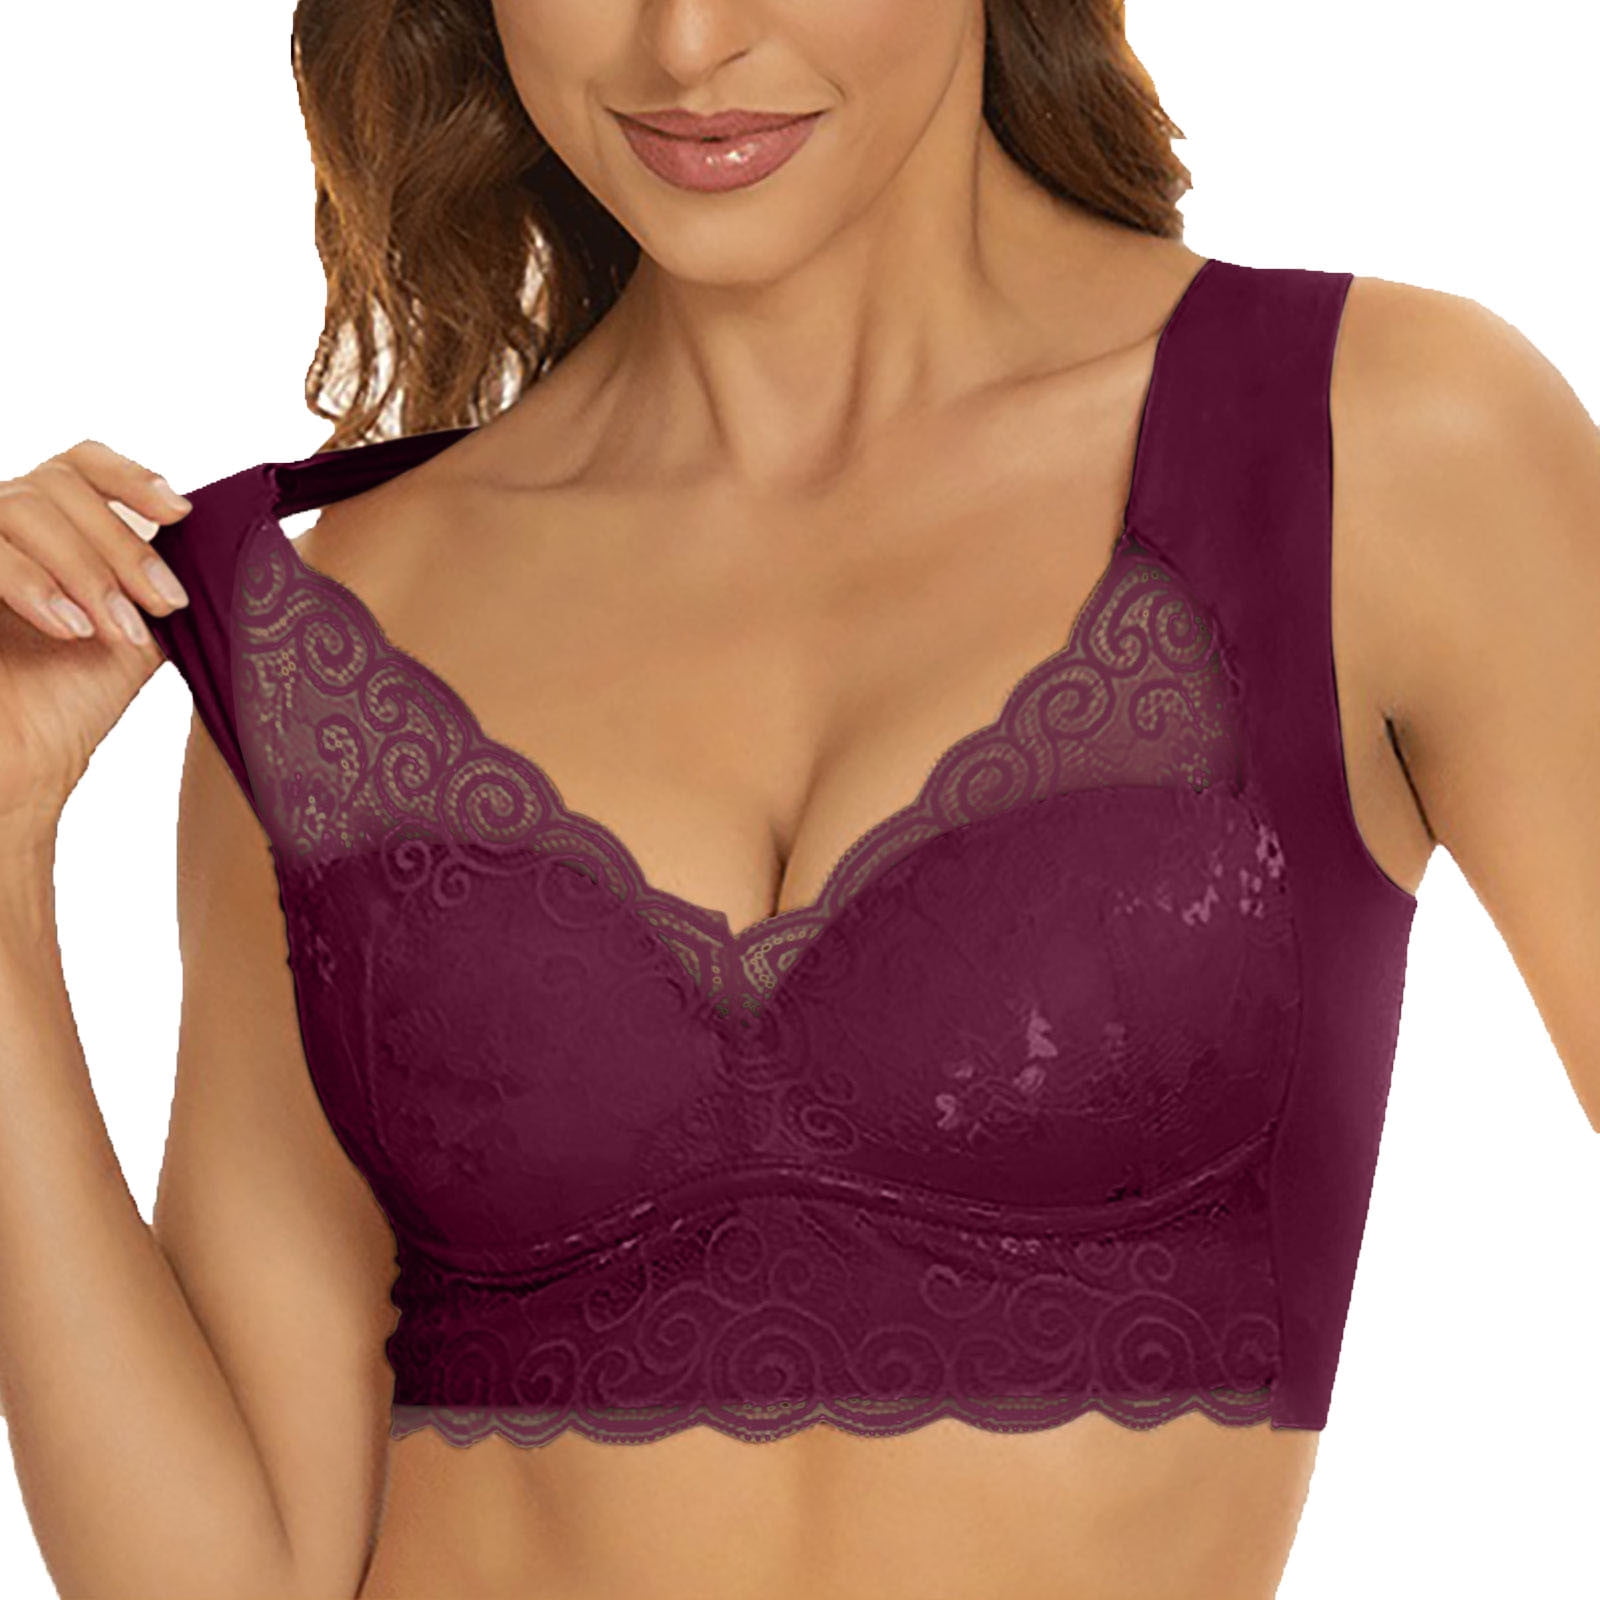 Puntoco Plus Size Clearance Bra,Large Padded Underwear Front